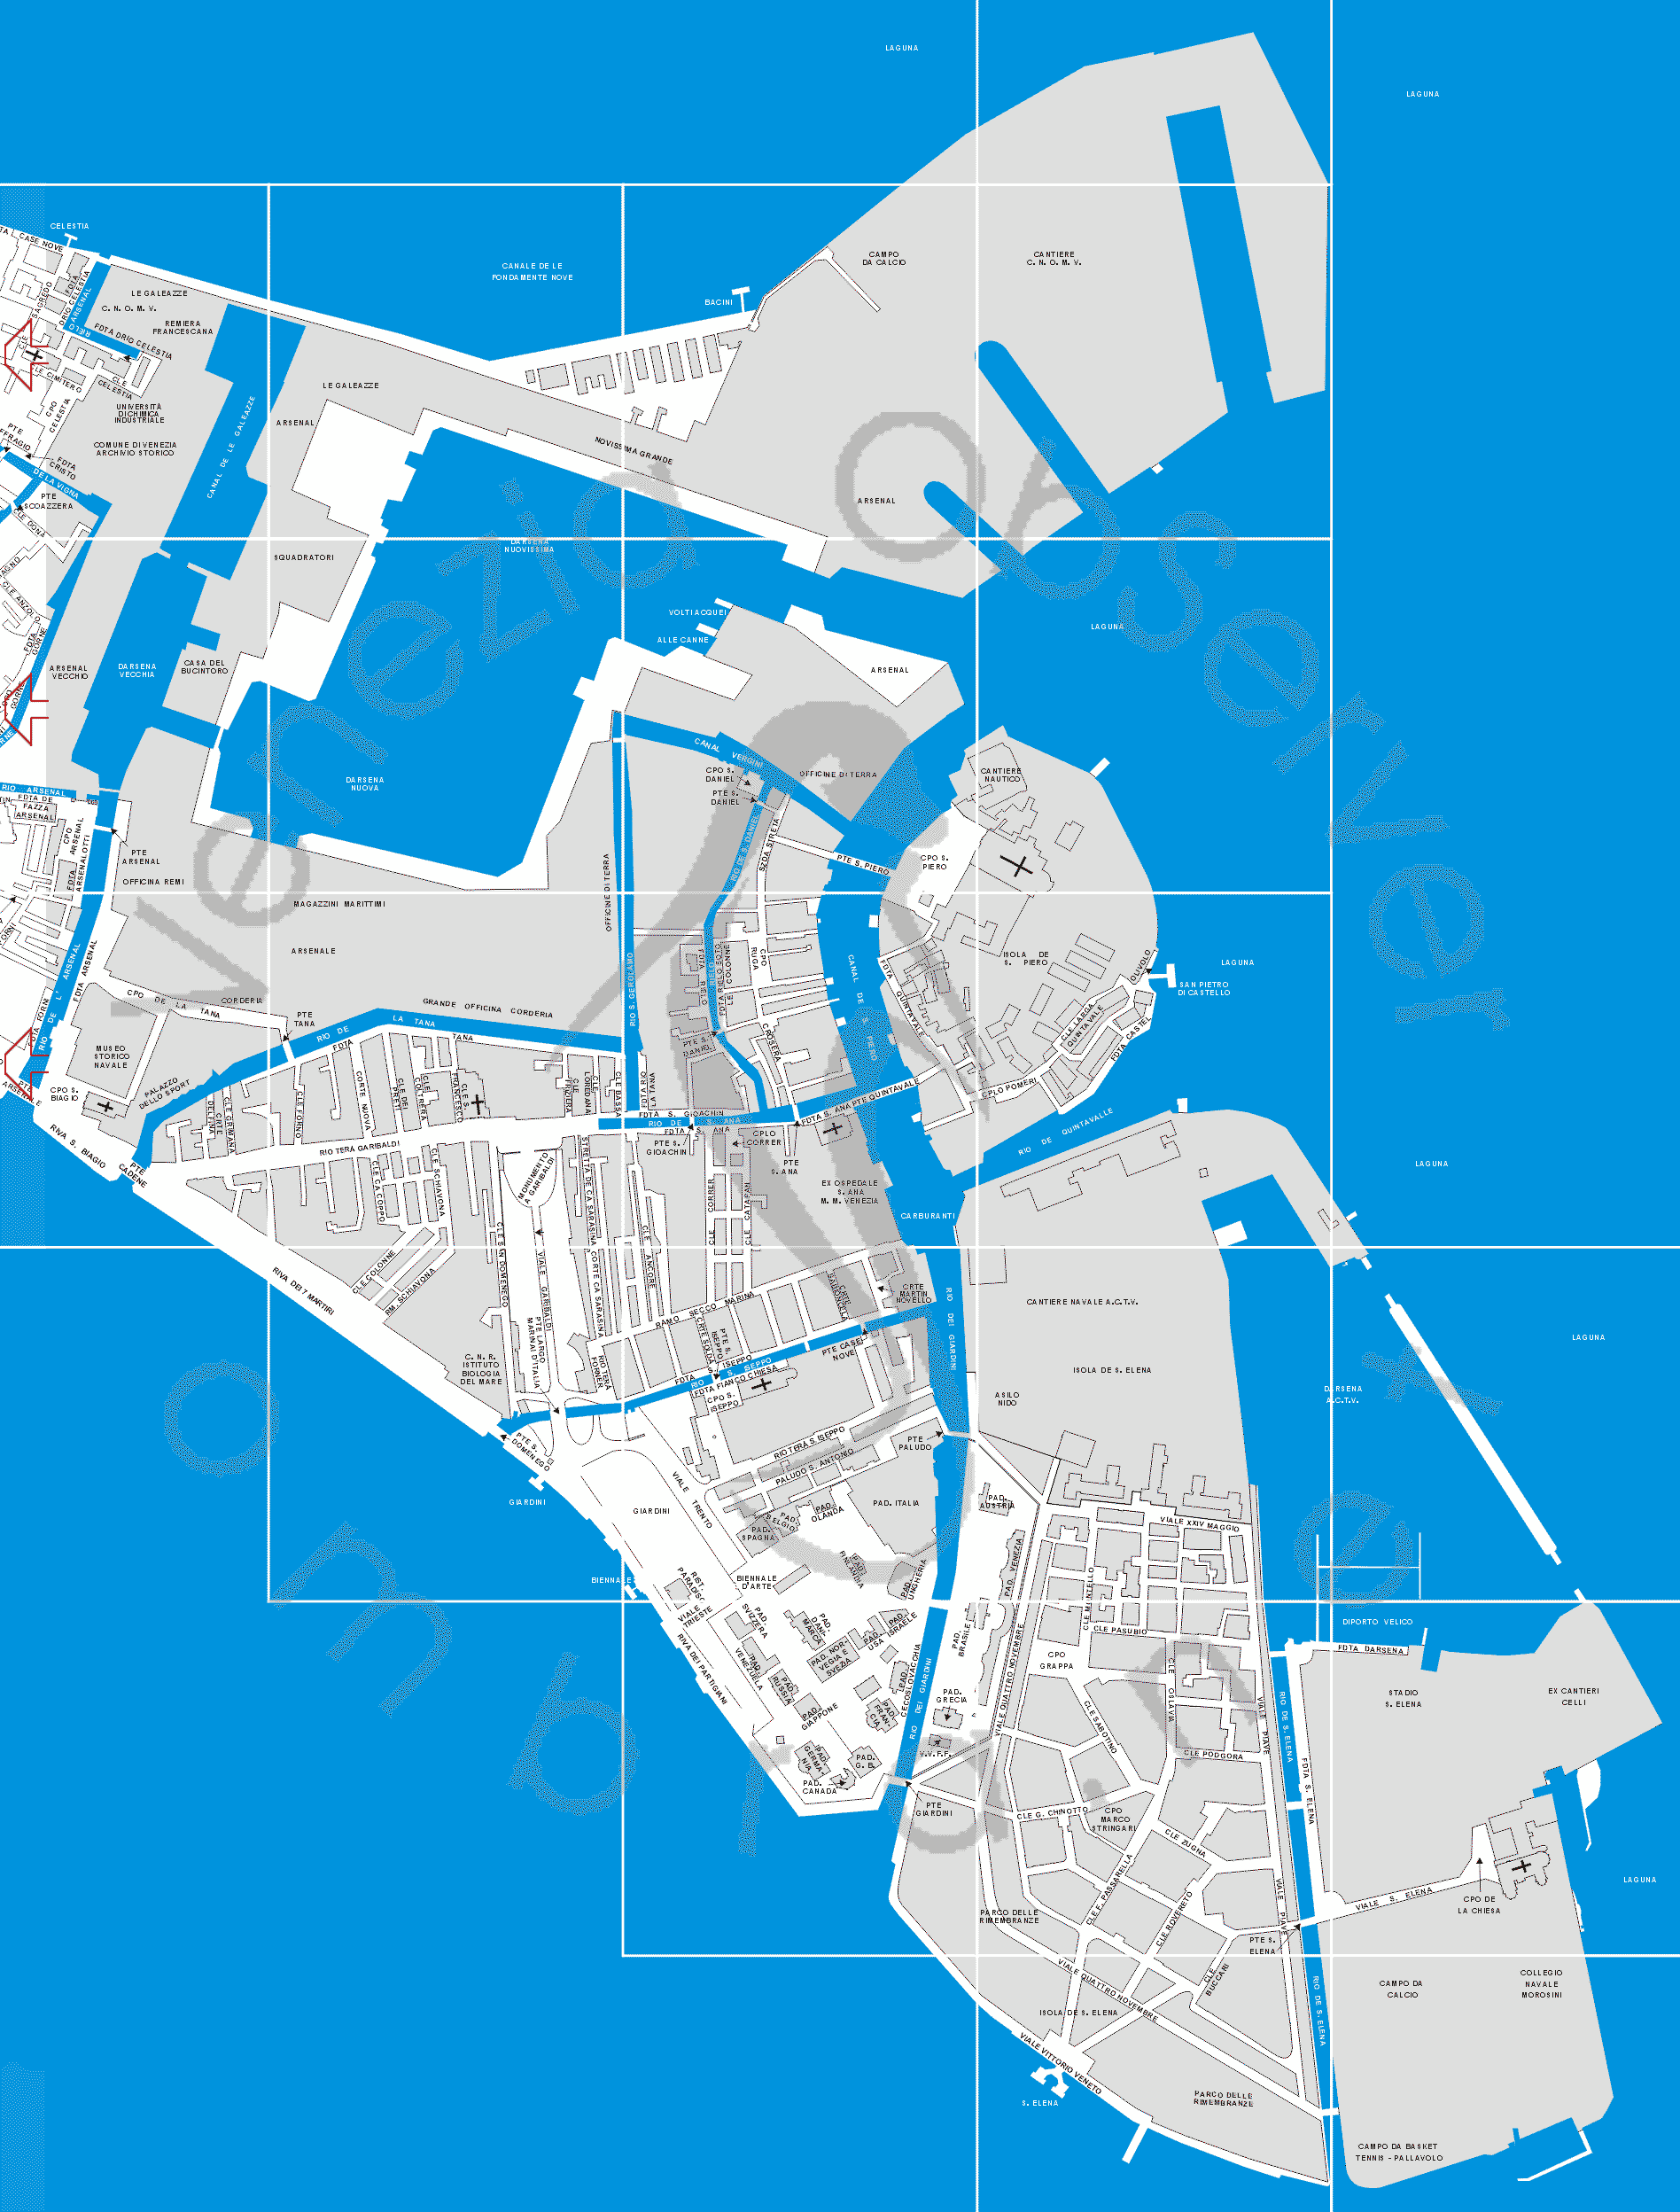 map of Venice Arsenale Biennale Sant'Elena with venetian itineraries